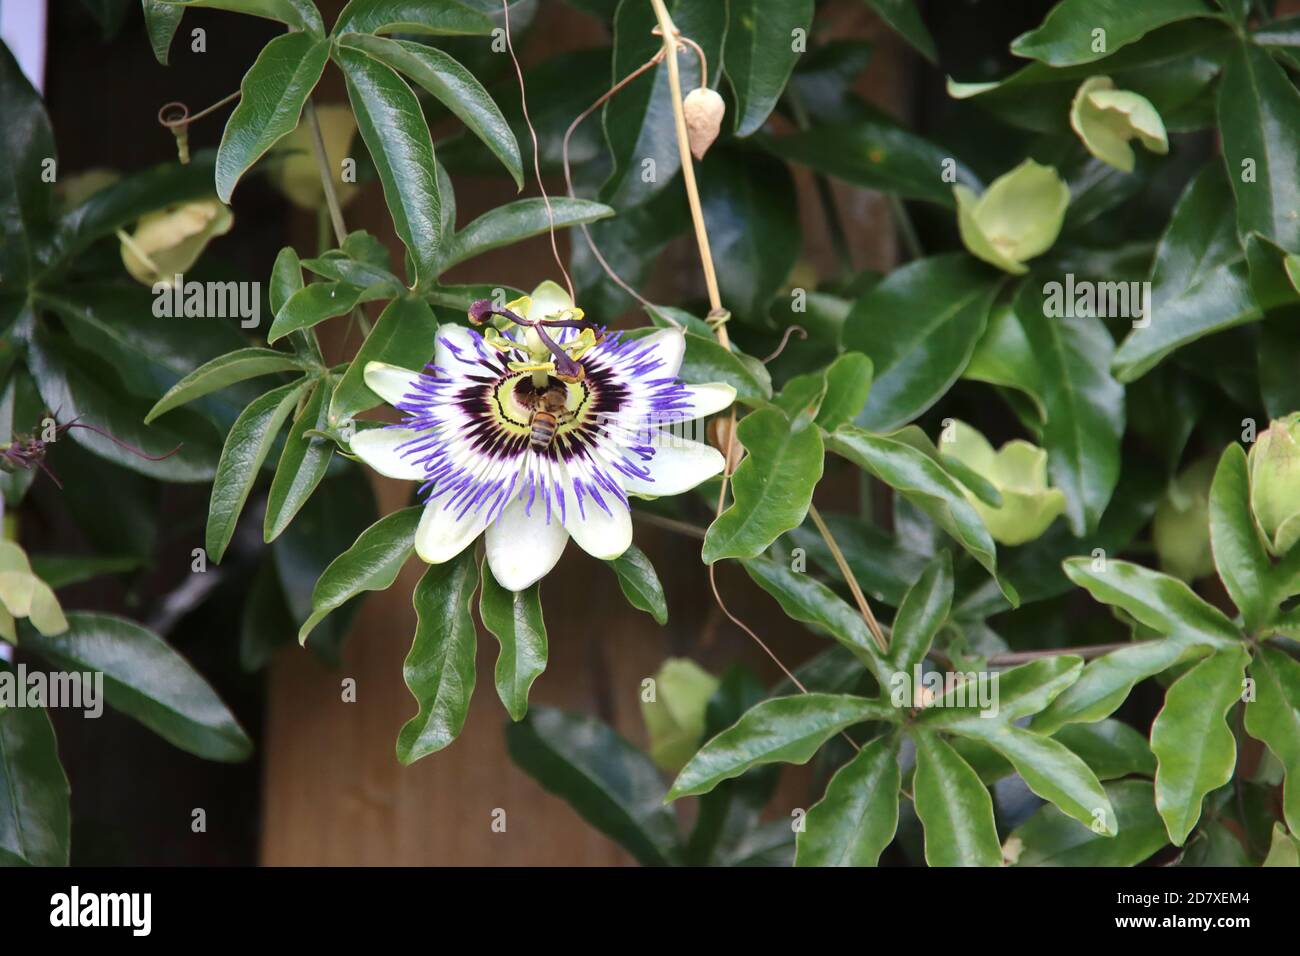 White, purple and yellow flower head of the passiflora passionflower in netherlands Stock Photo